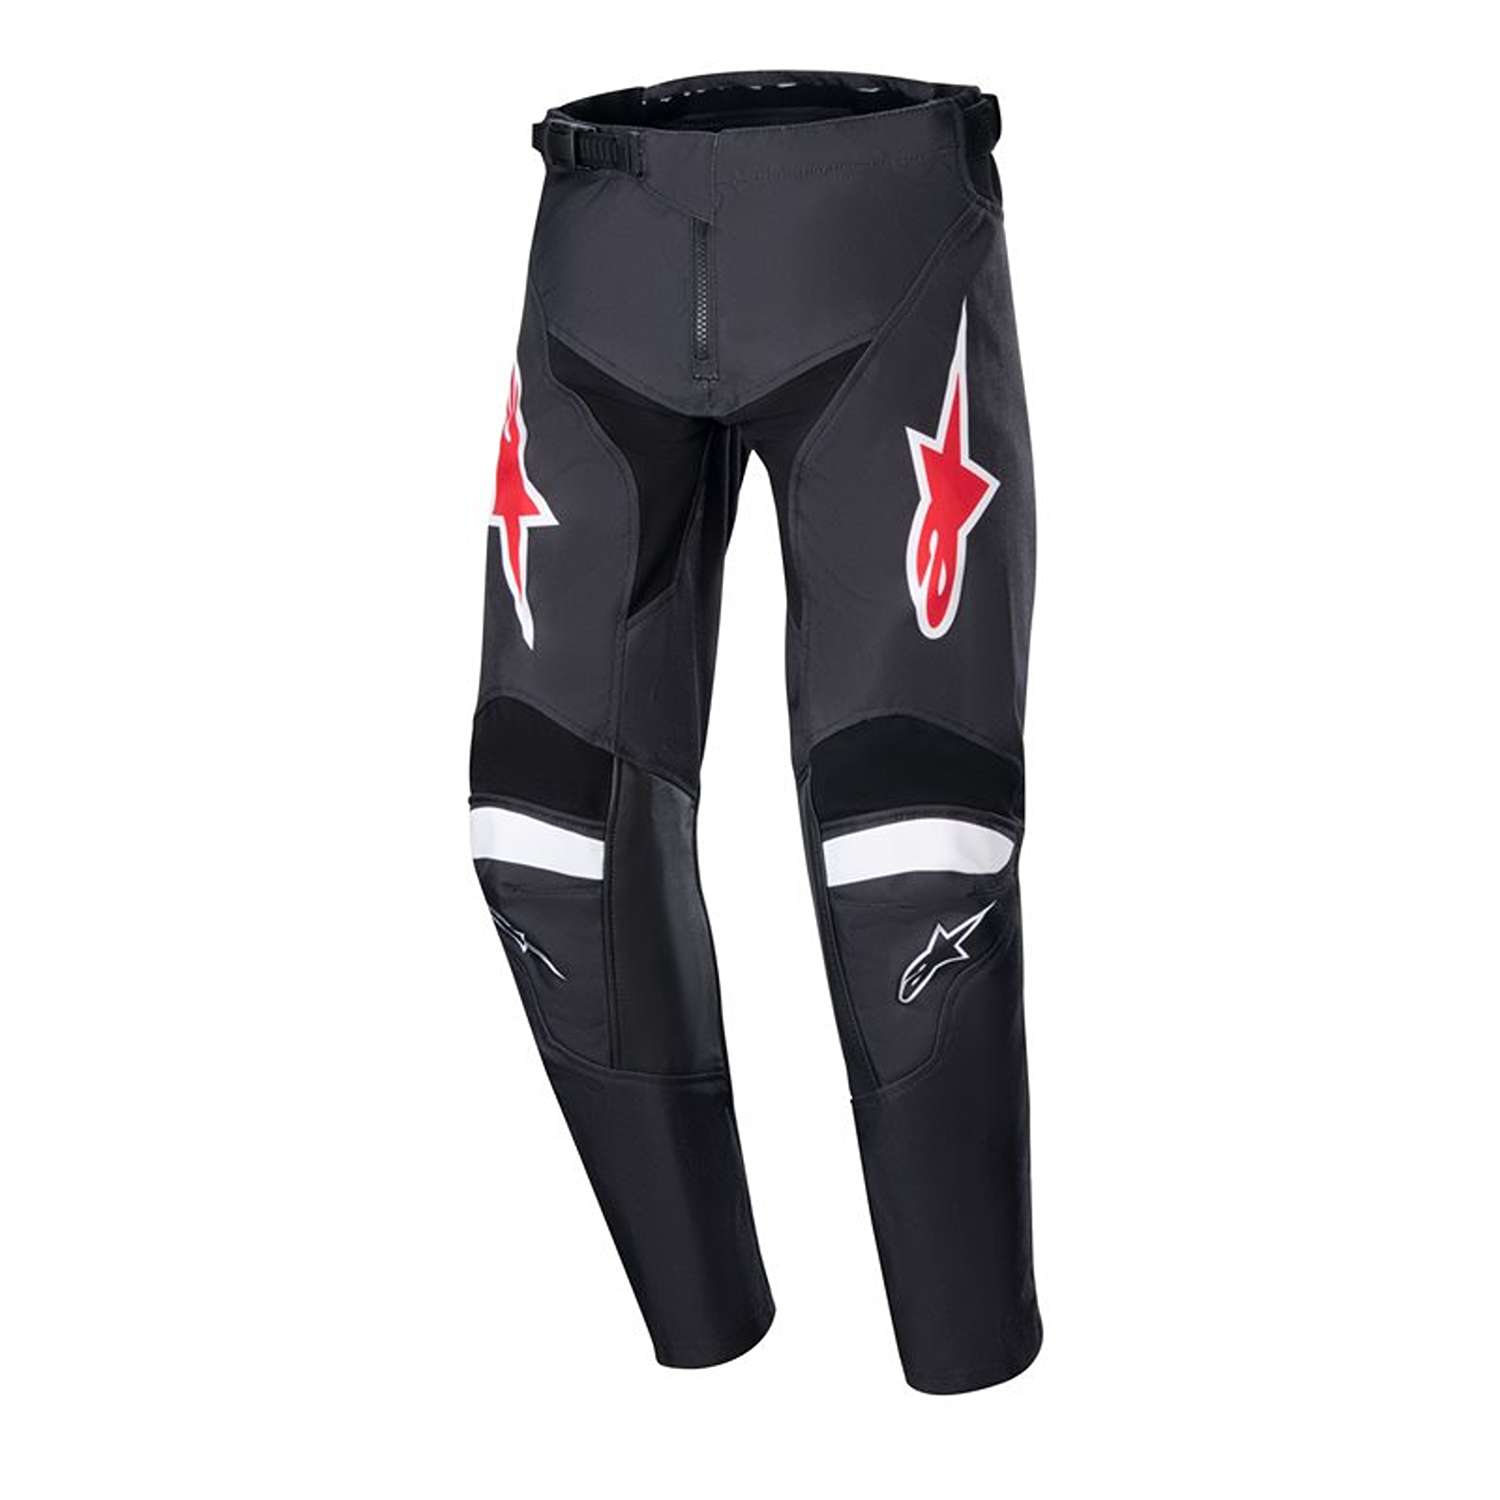 Image of Alpinestars Youth Racer Lucent Pants Black White Size 24 ID 8059347267432